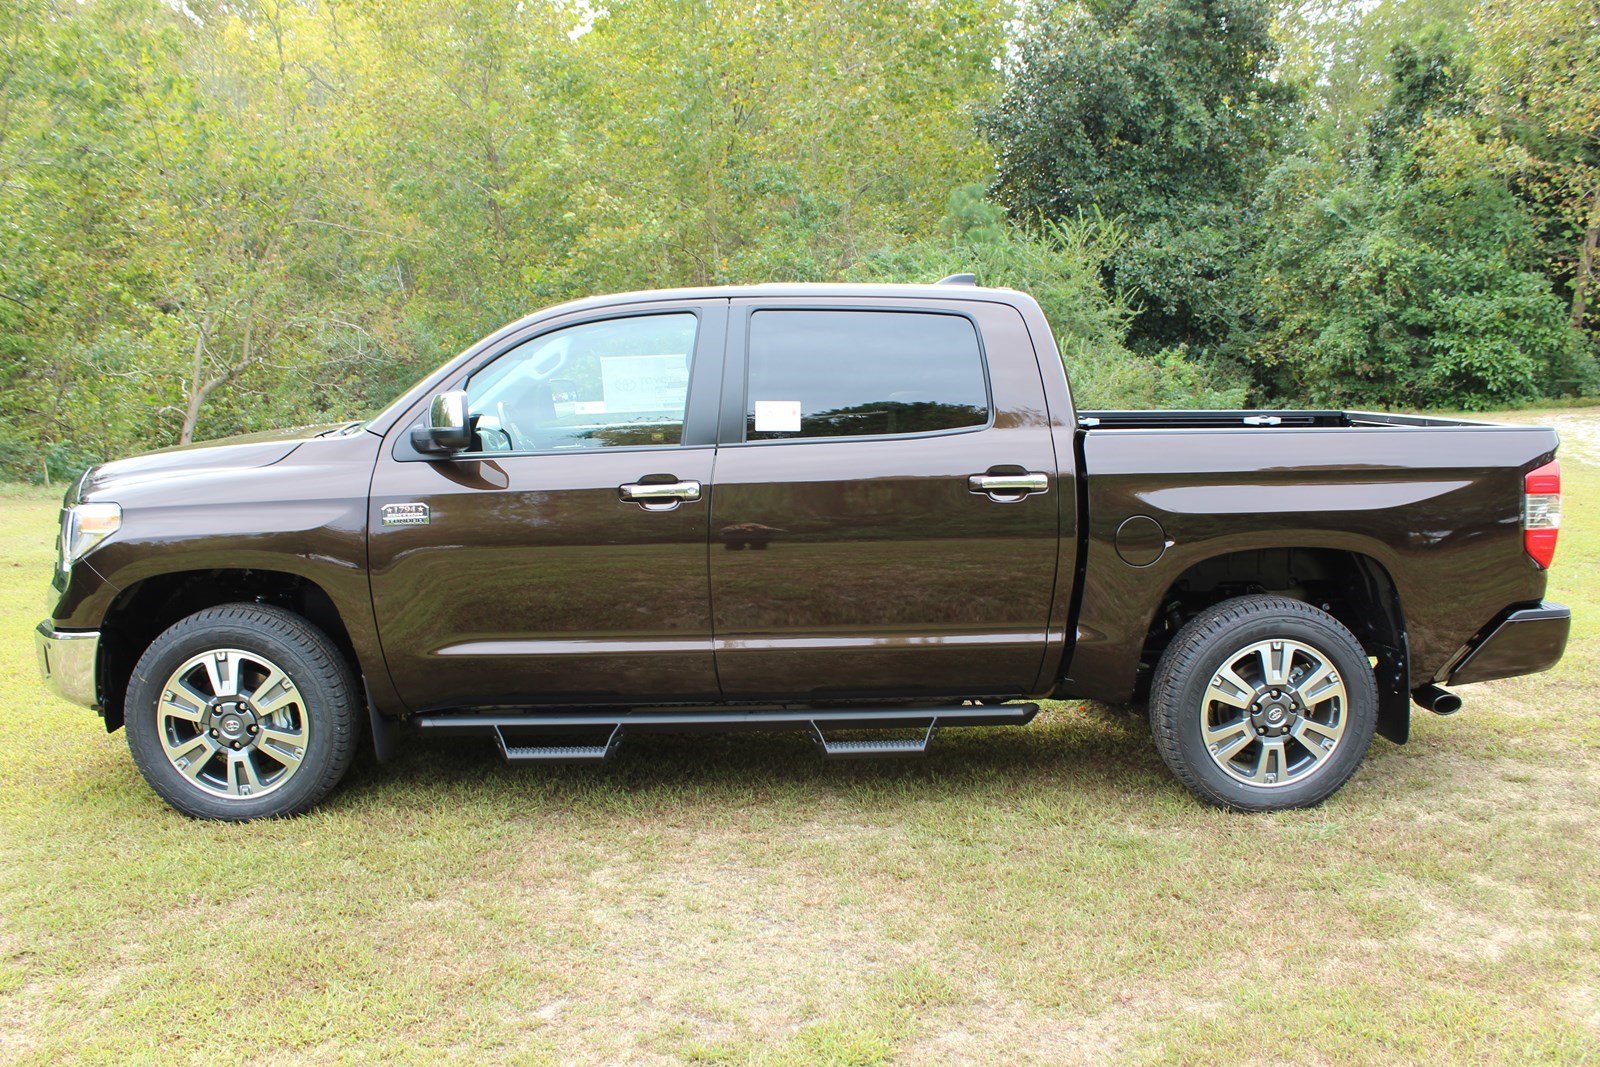 New 2020 Toyota Tundra 4WD 1794 Edition Crew Cab Pickup in Gloucester